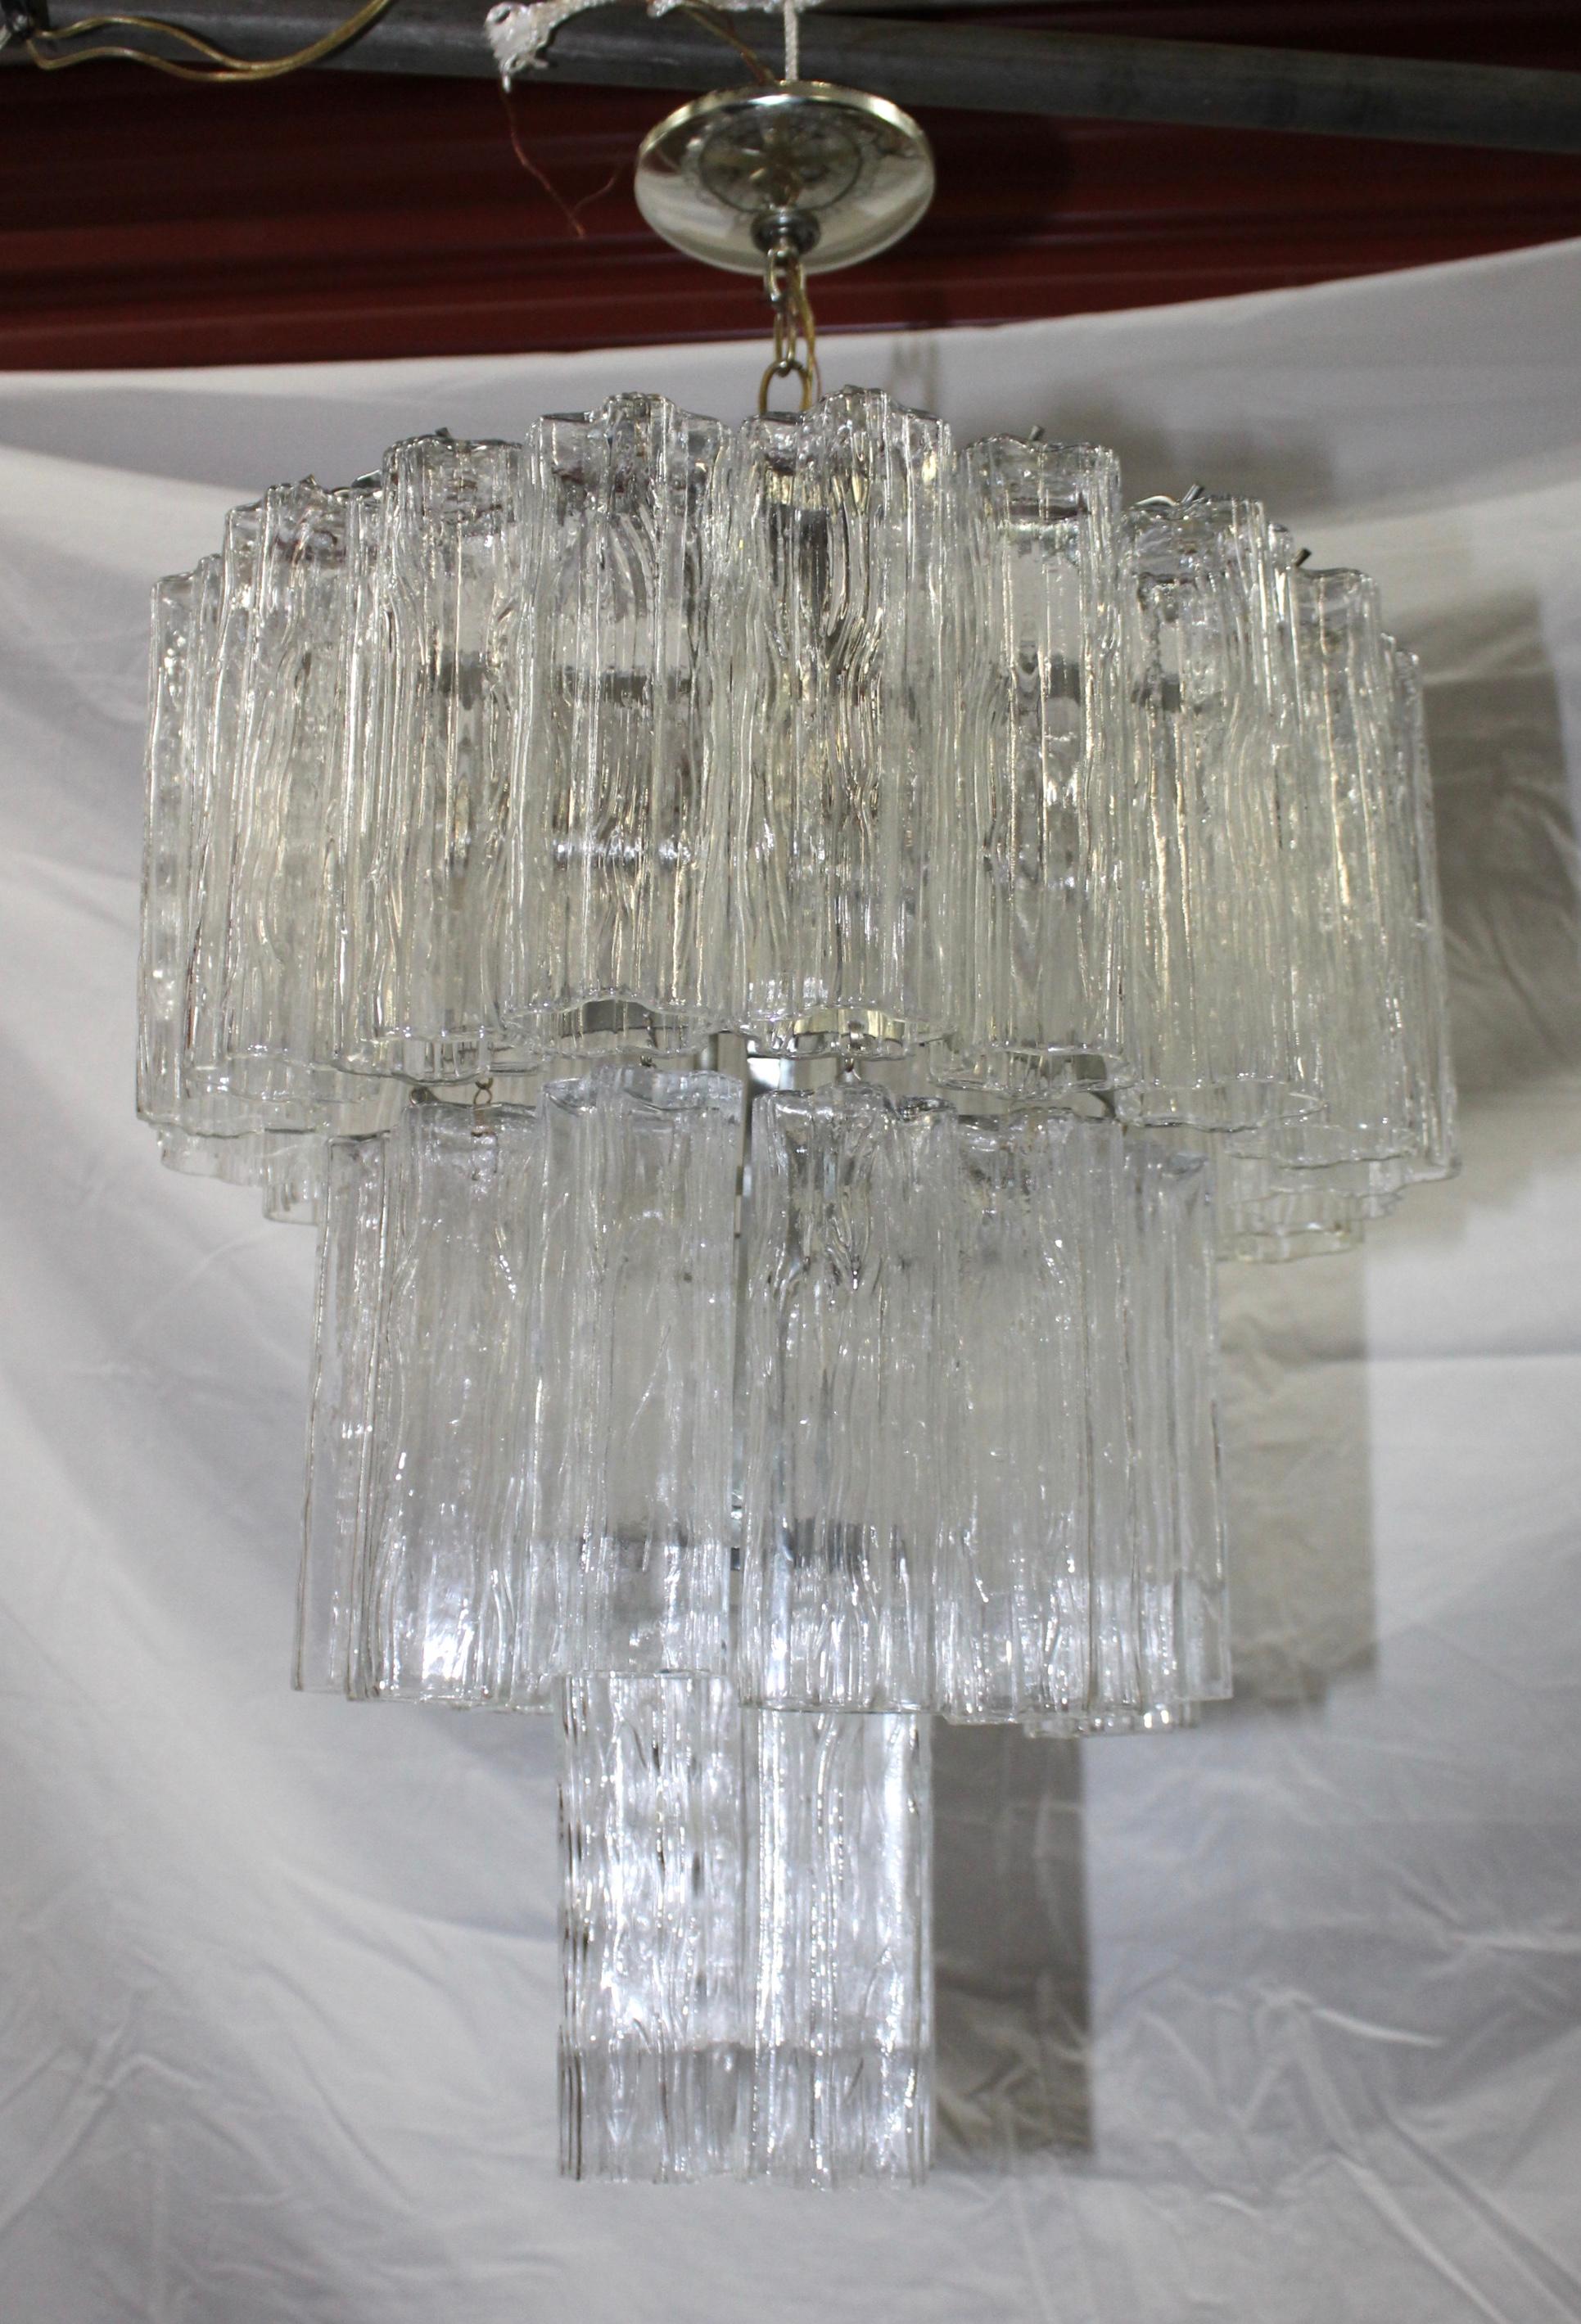 Stunning 1960s Mid-Century Modern tronchi Murano 3-tier chandelier with chrome frame.